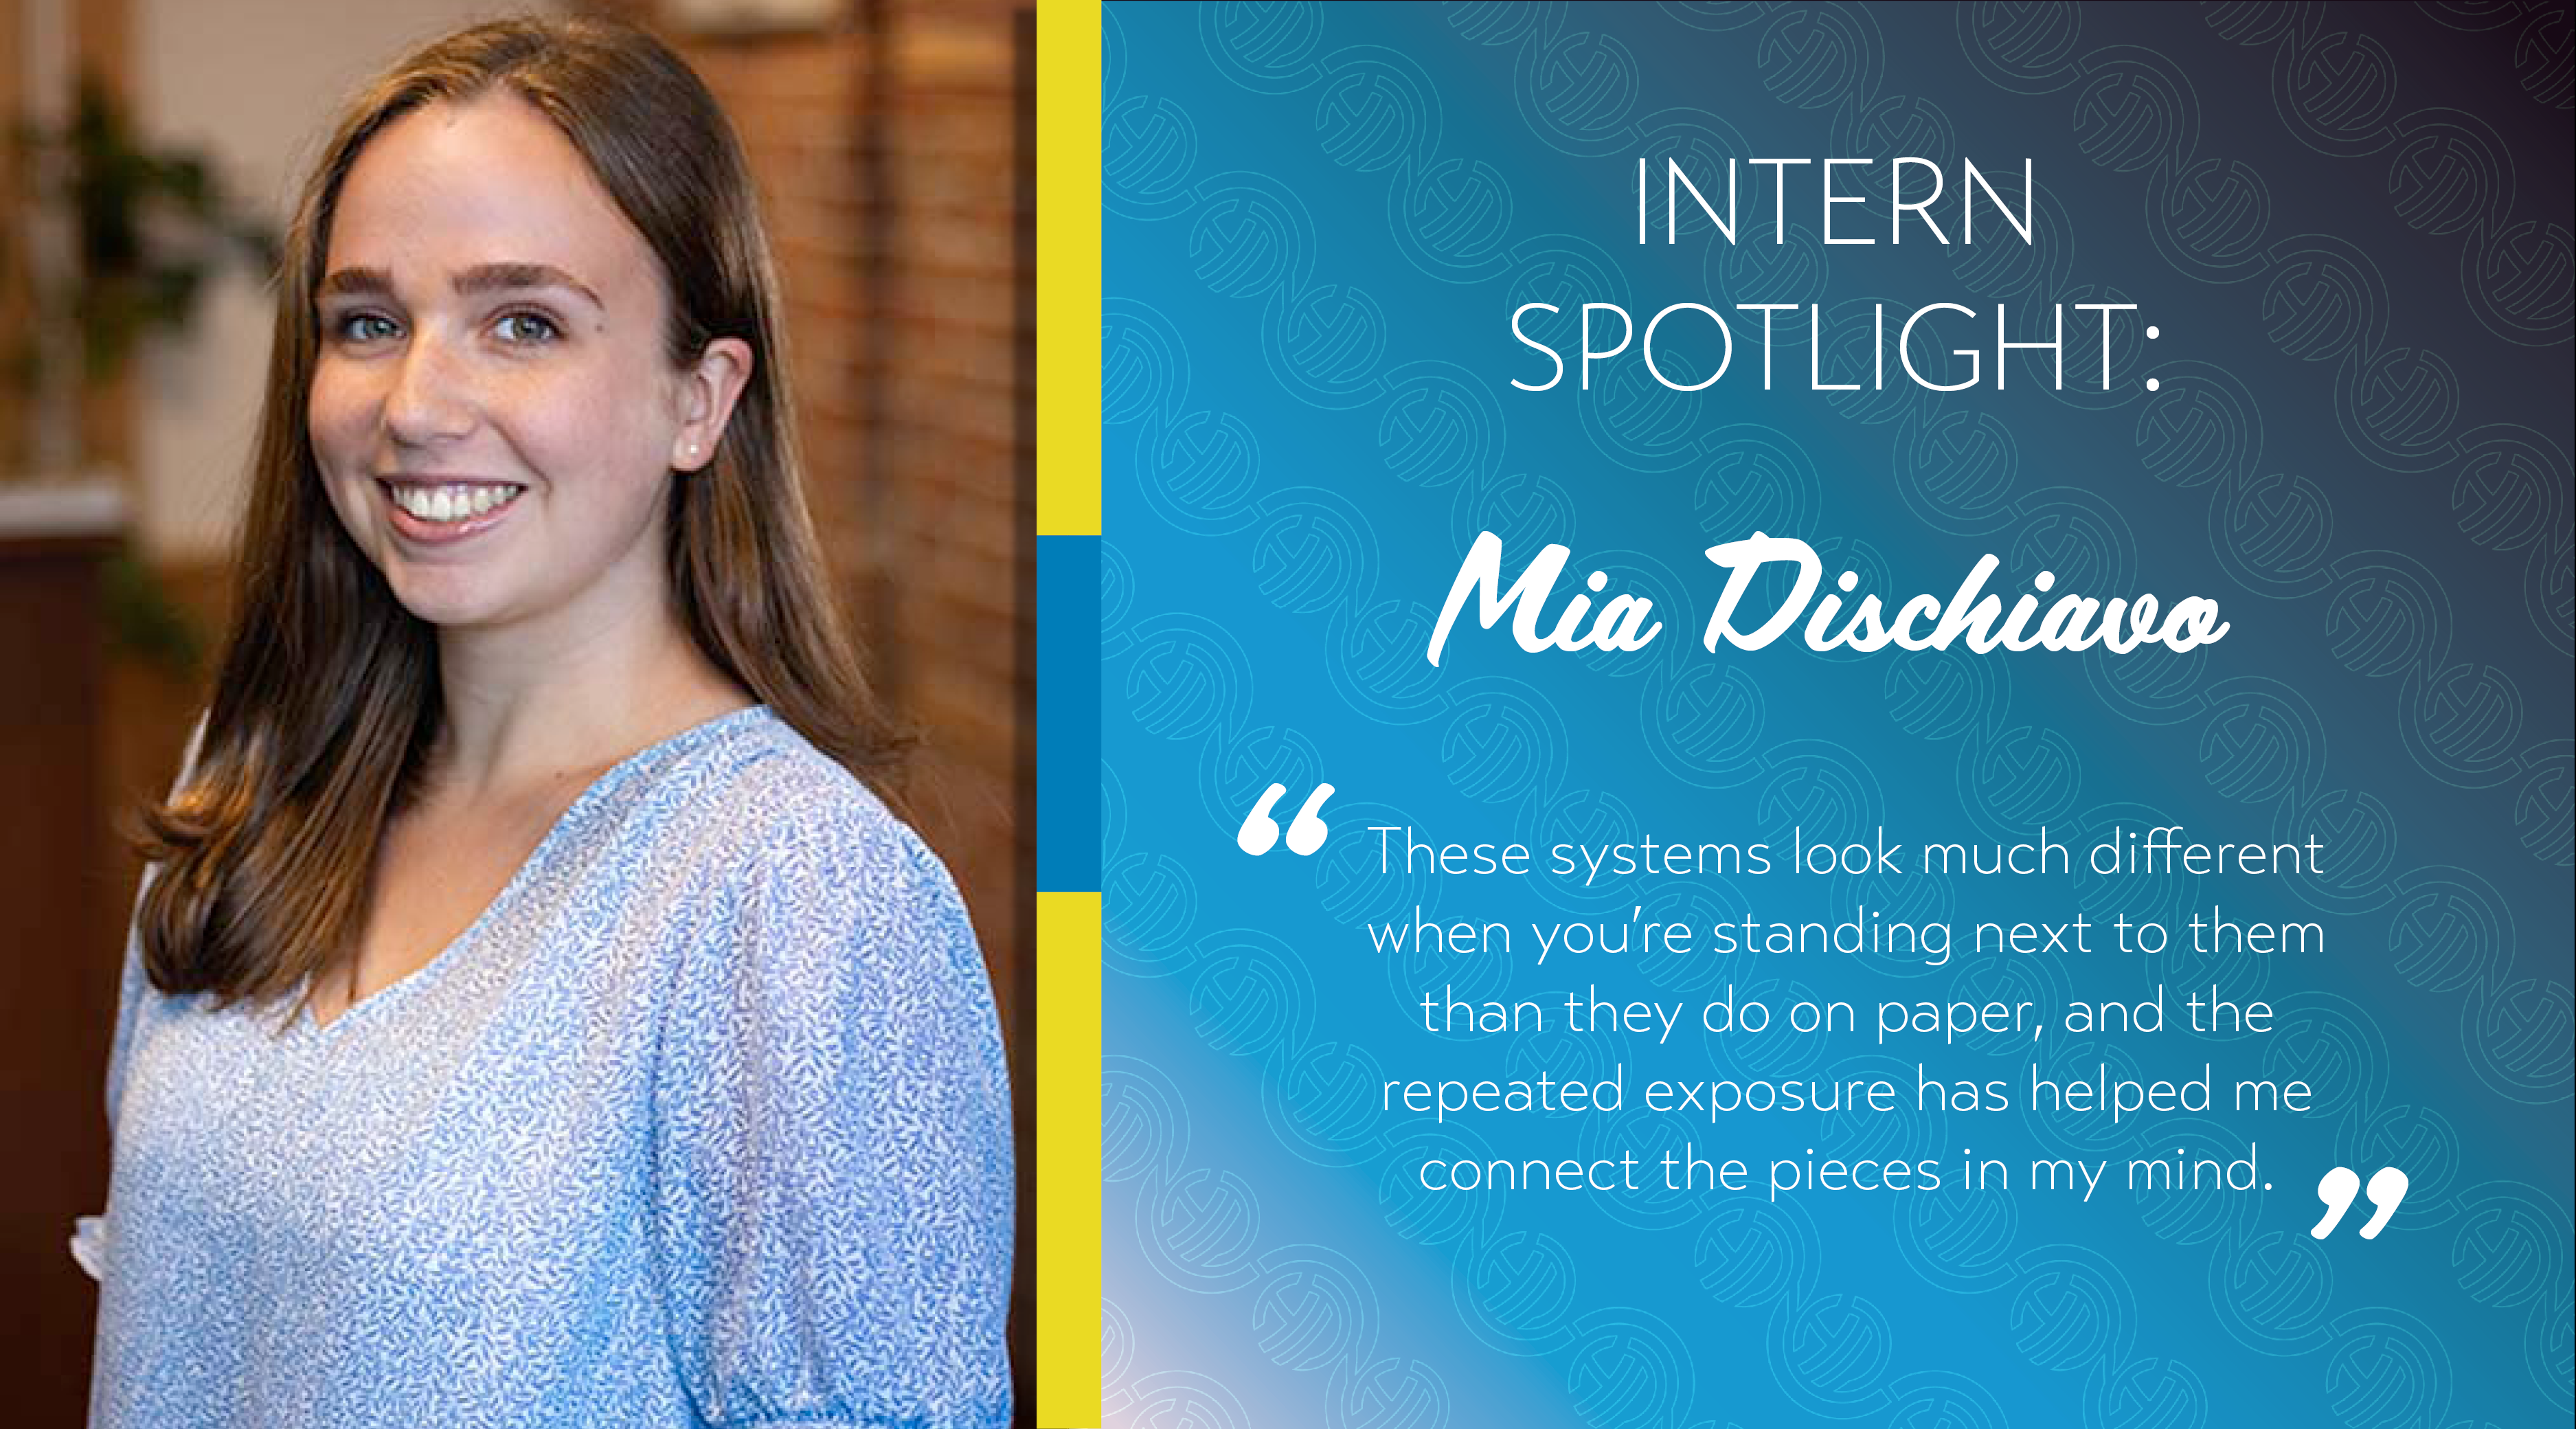 Mia Dischiavo's corporate headshot is on the left and on the right is her name, the words Intern Spotlight, and a quote by her from inside the article.